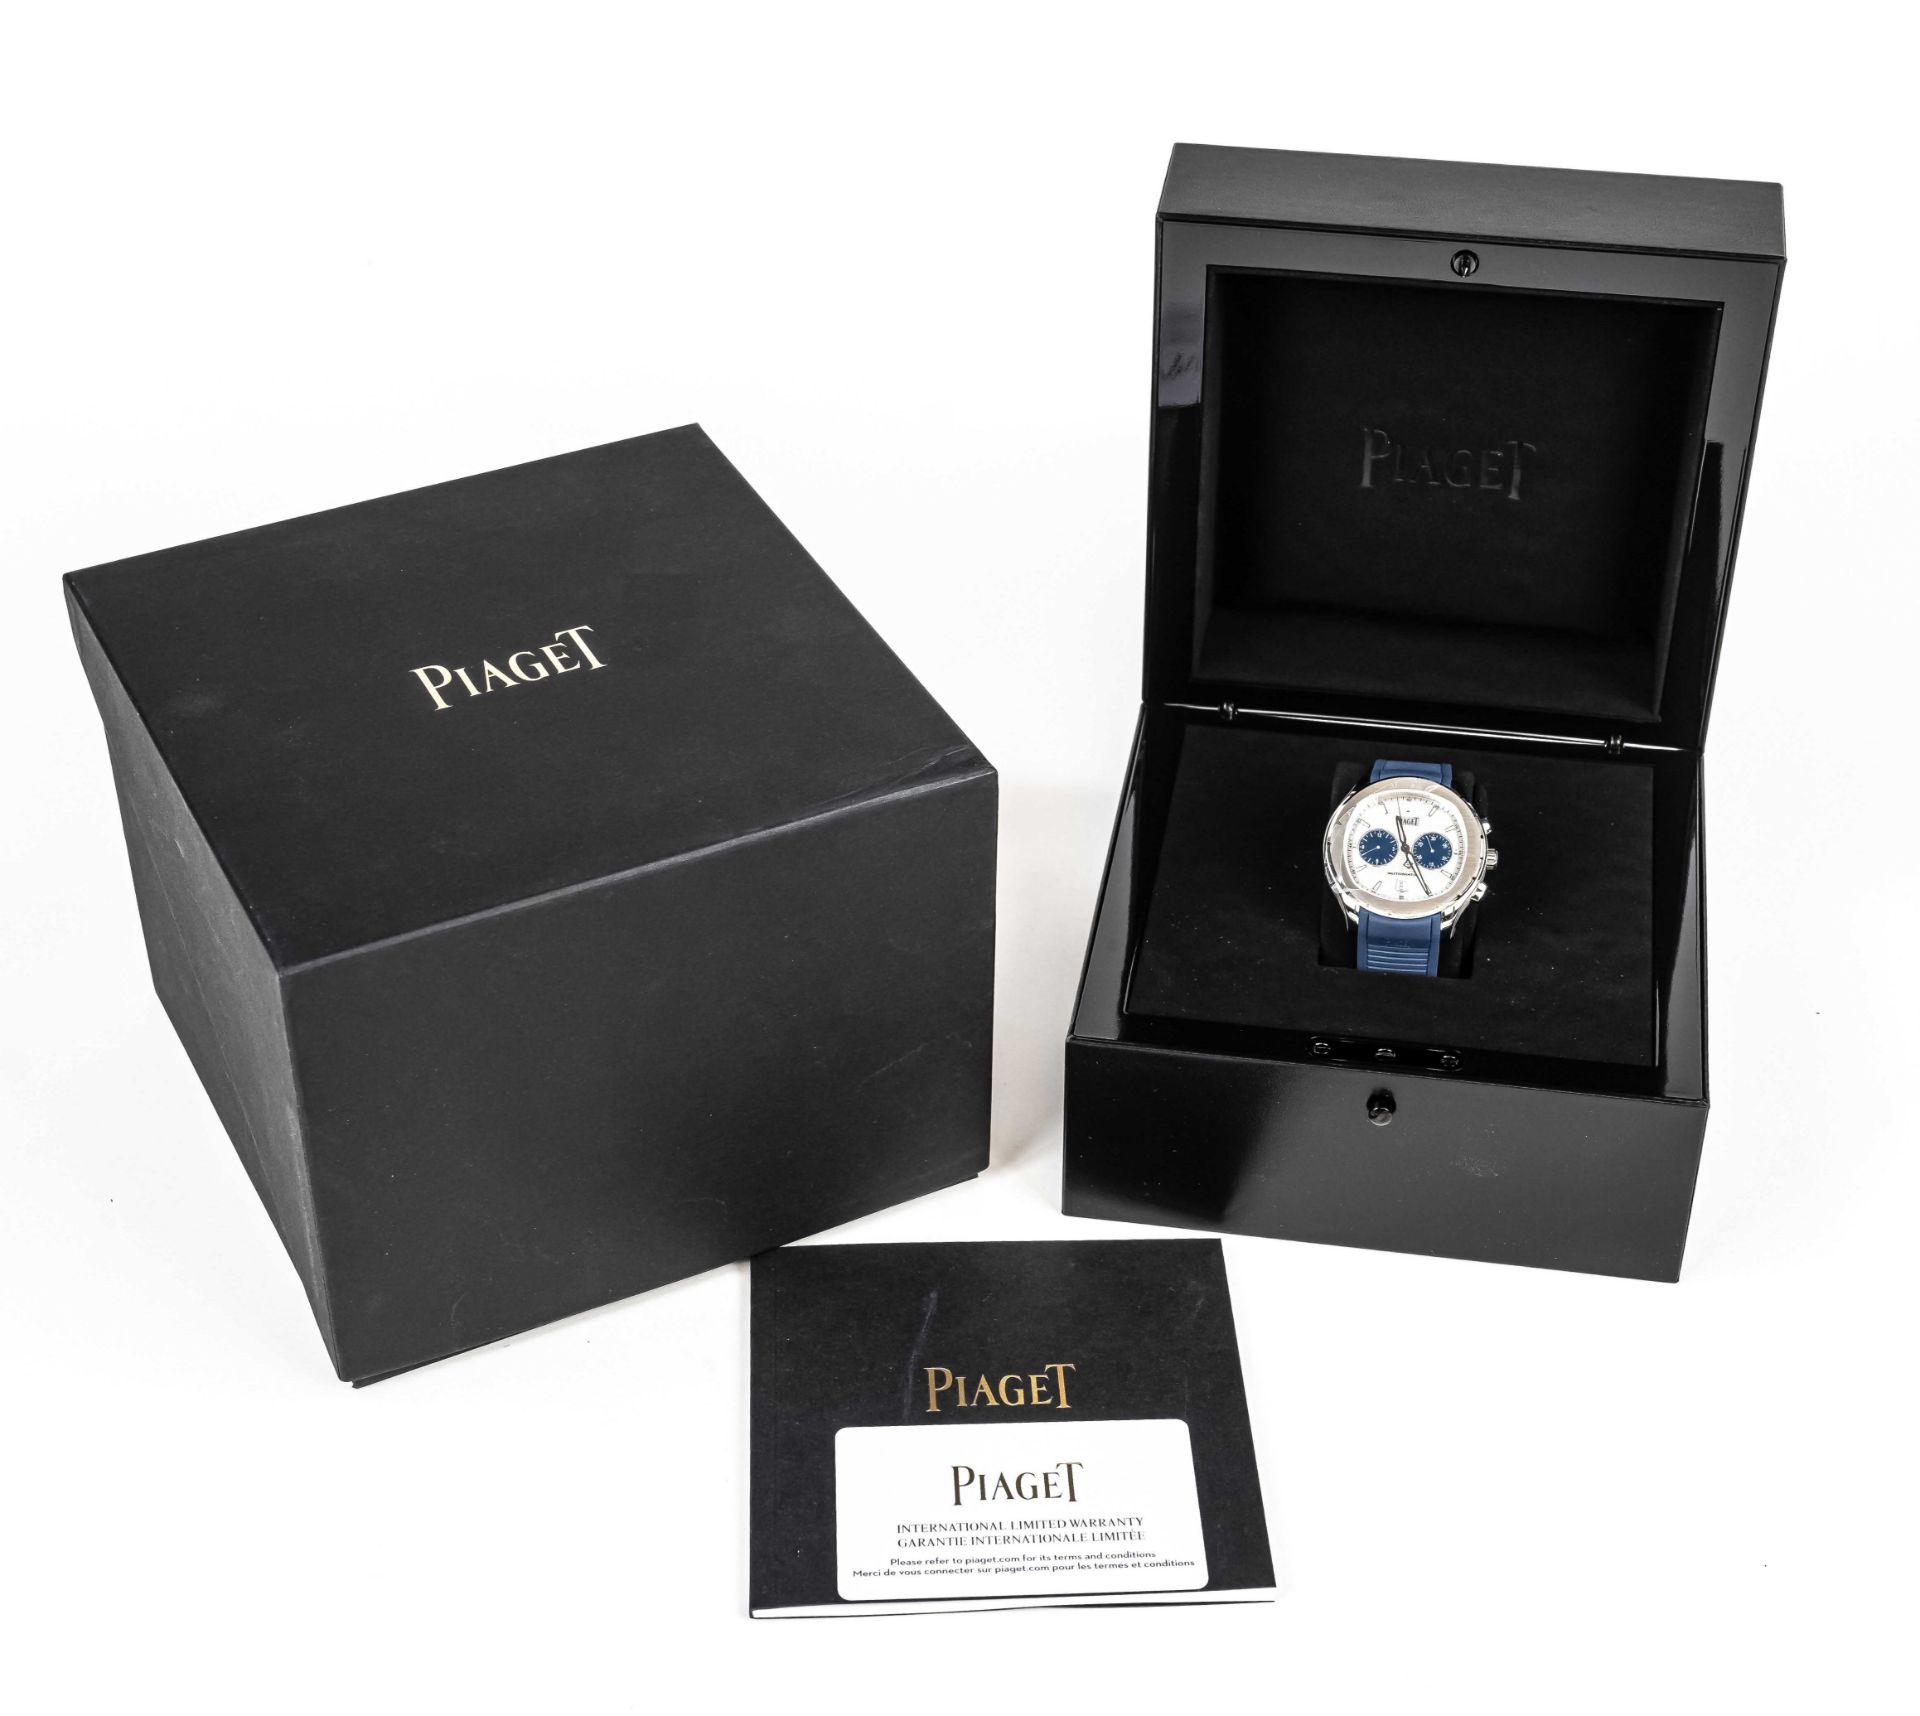 Piaget Polo S, chronograph, automatic with 50 hours power reserve, satin and polished steel case - Image 2 of 3